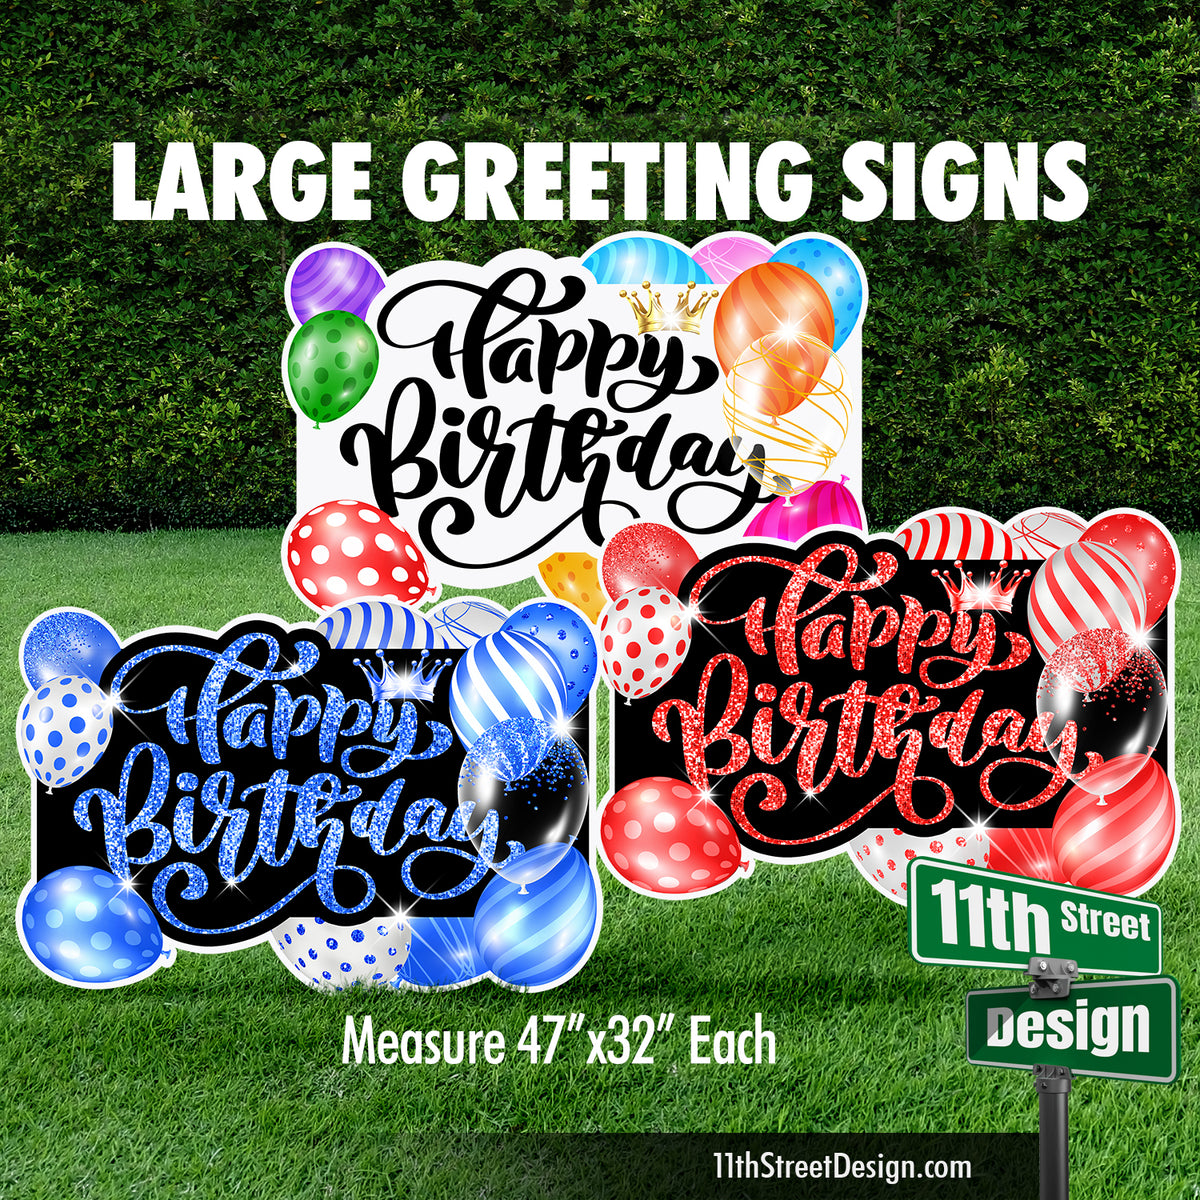 Happy Birthday Large Greeting Signs - Balloons Blue, Red, Multi Color